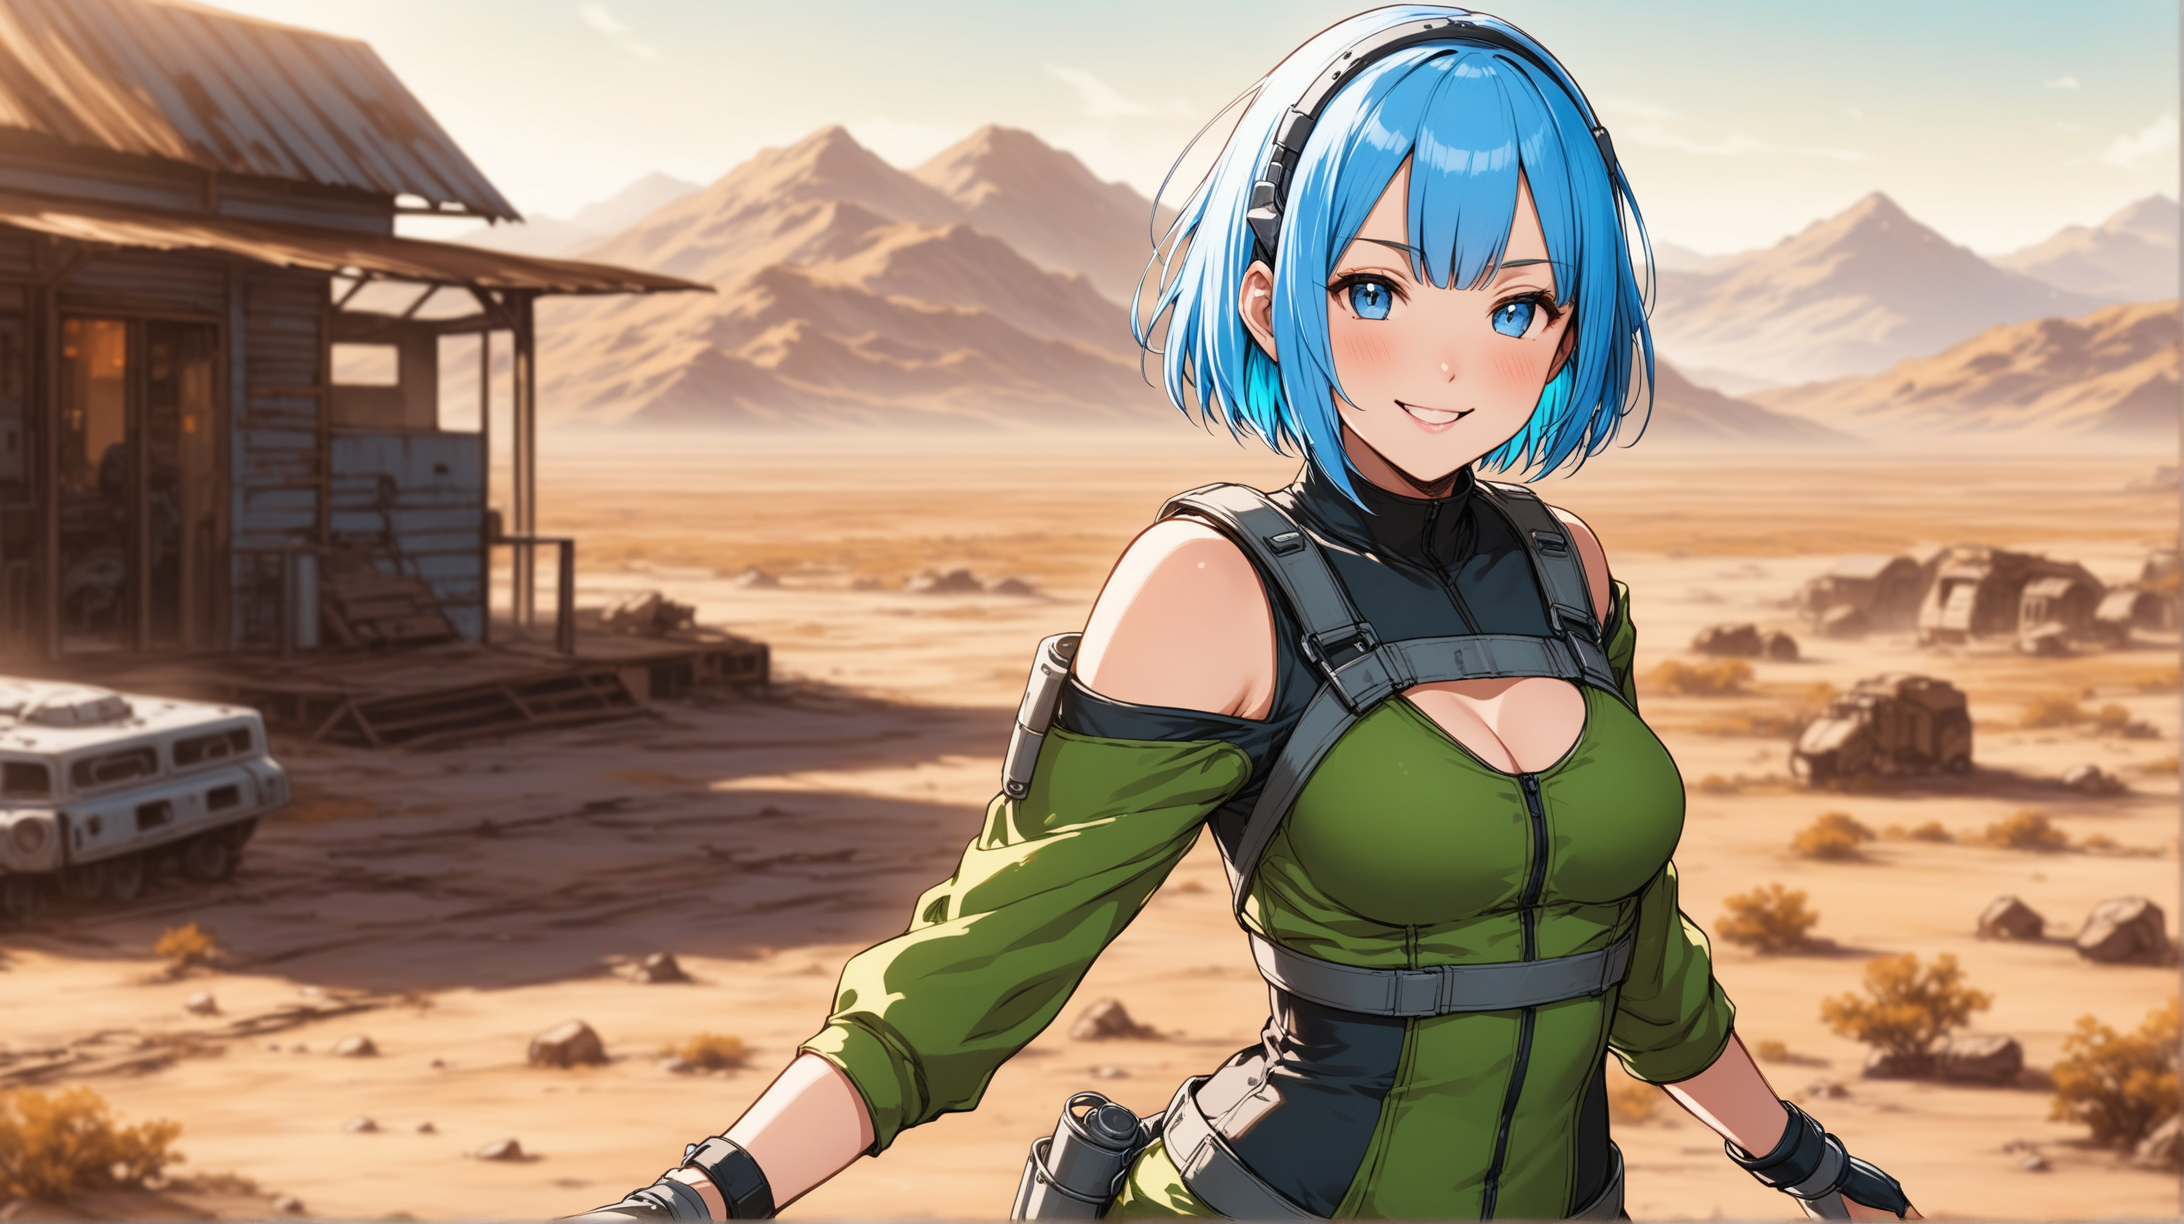 Draw the character Rem, high quality, in a carefree pose, outdoors, wearing an outfit inspired from the Fallout series, smiling at the viewer